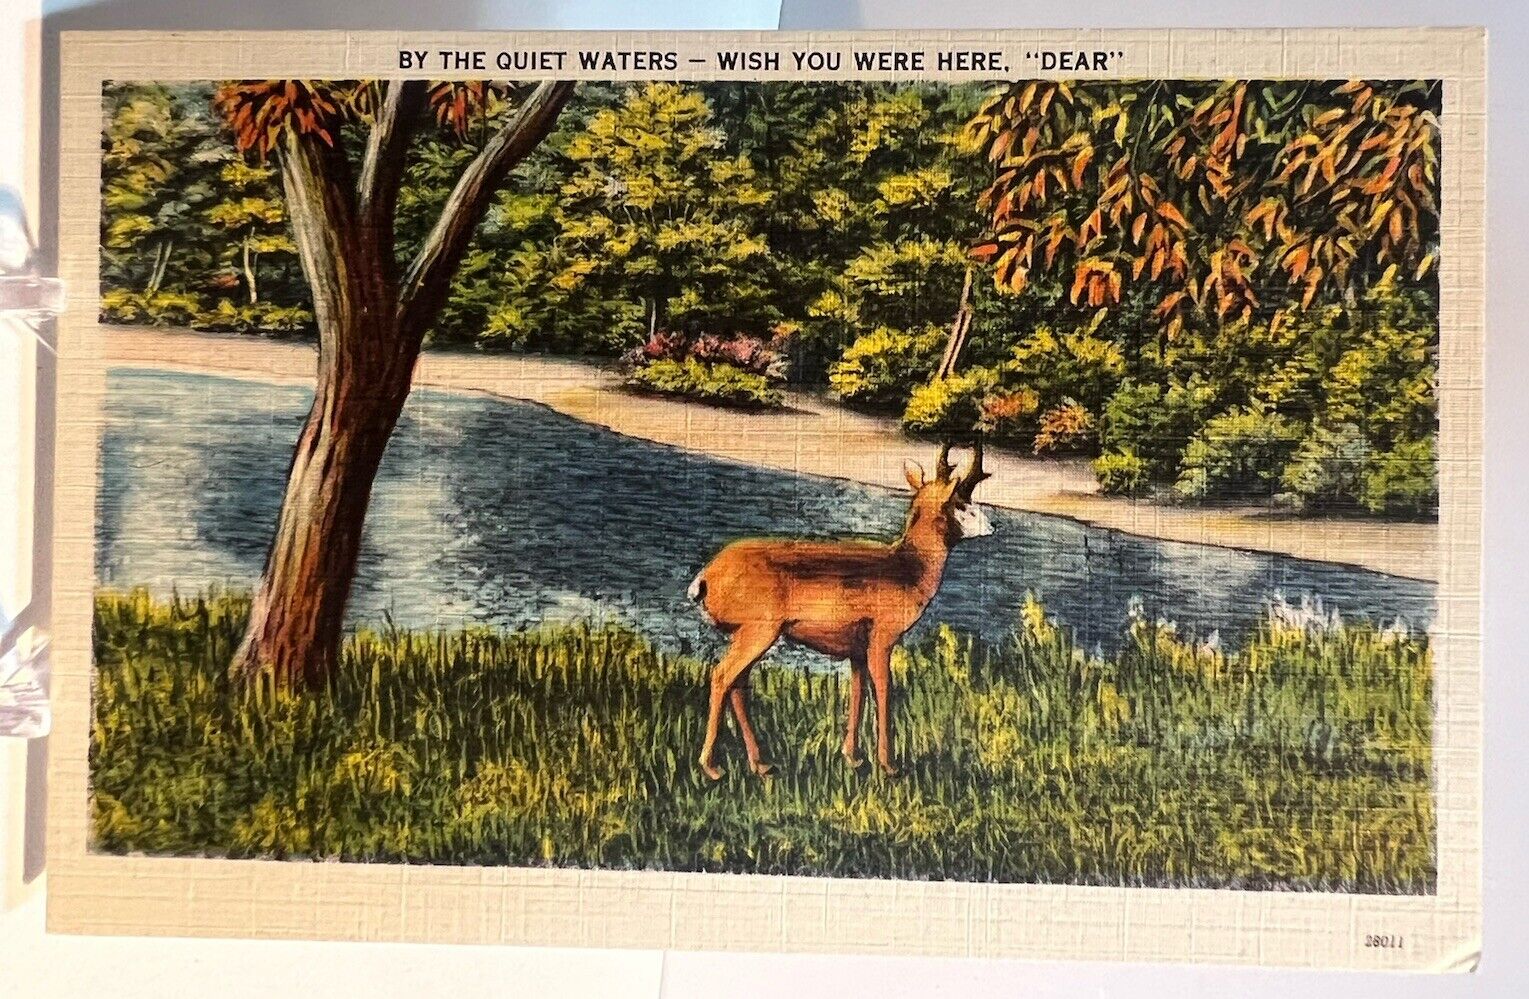 By the Quiet Waters, Wish You Were Here Dear - Vintage Postcard - Unposted